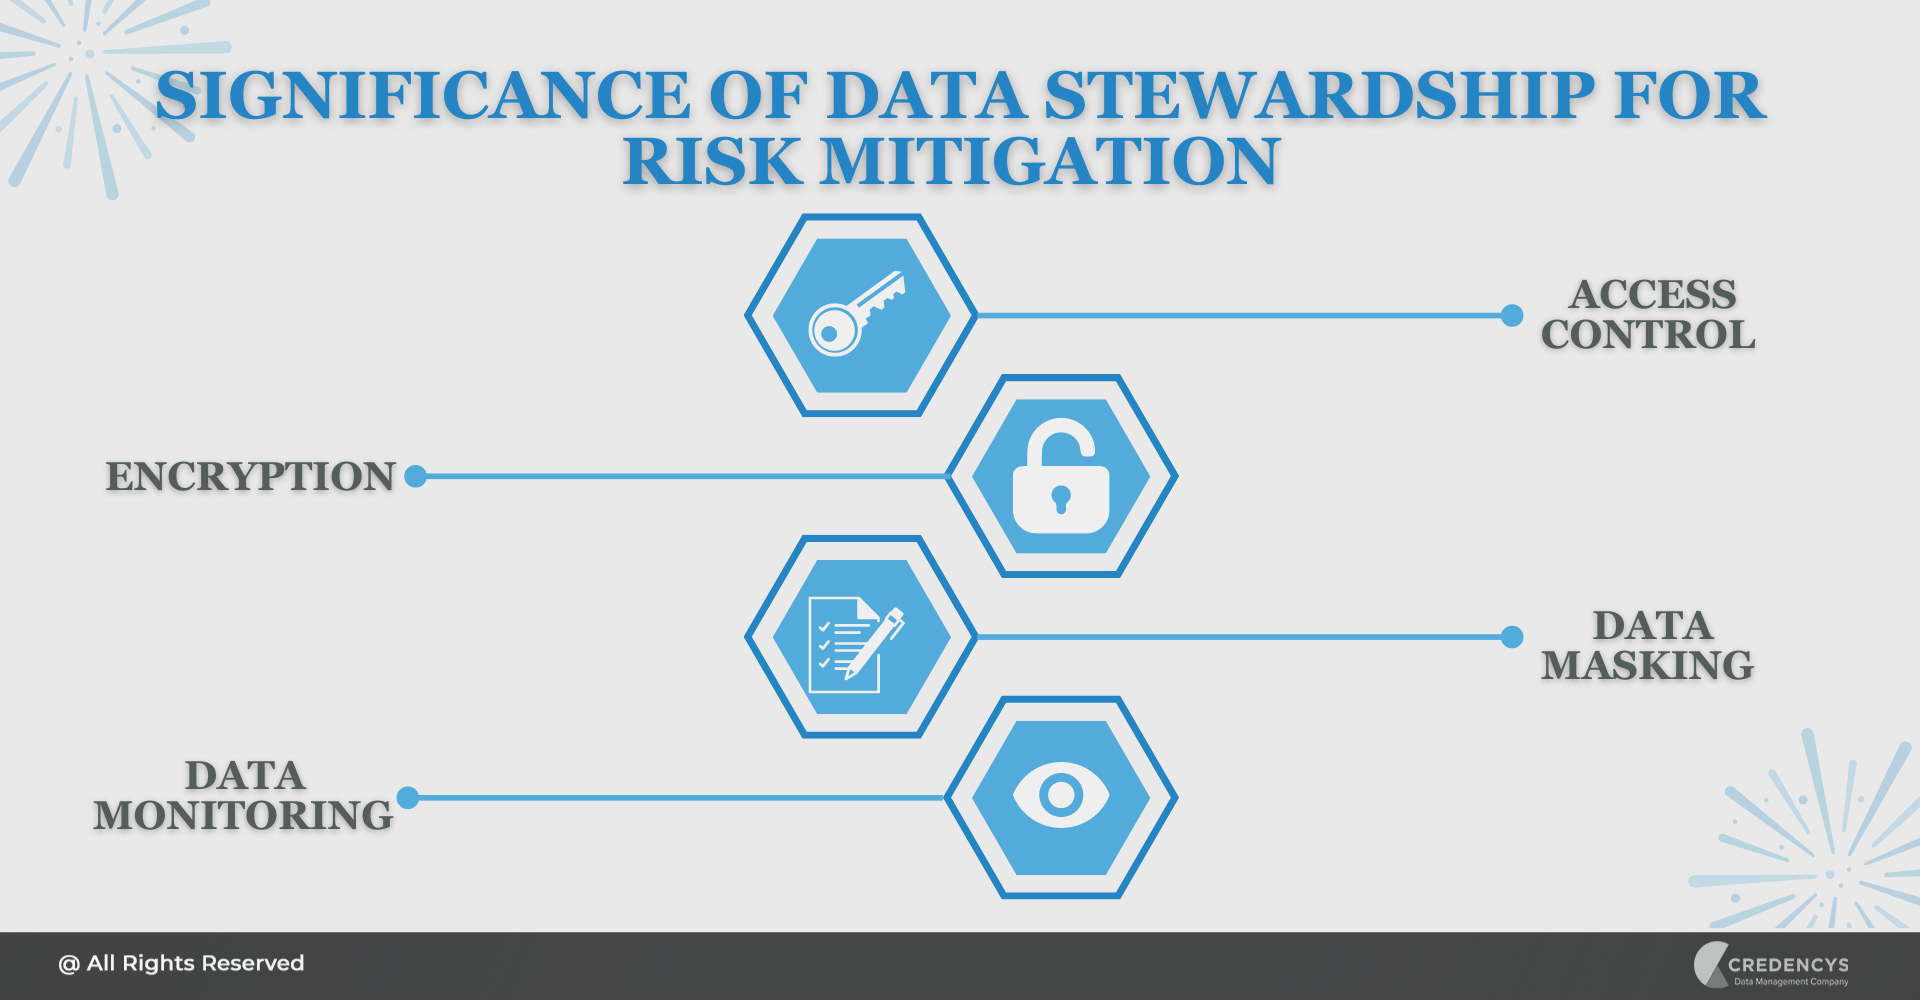 Significance of Data Stewardship for Security & Risk Mitigation